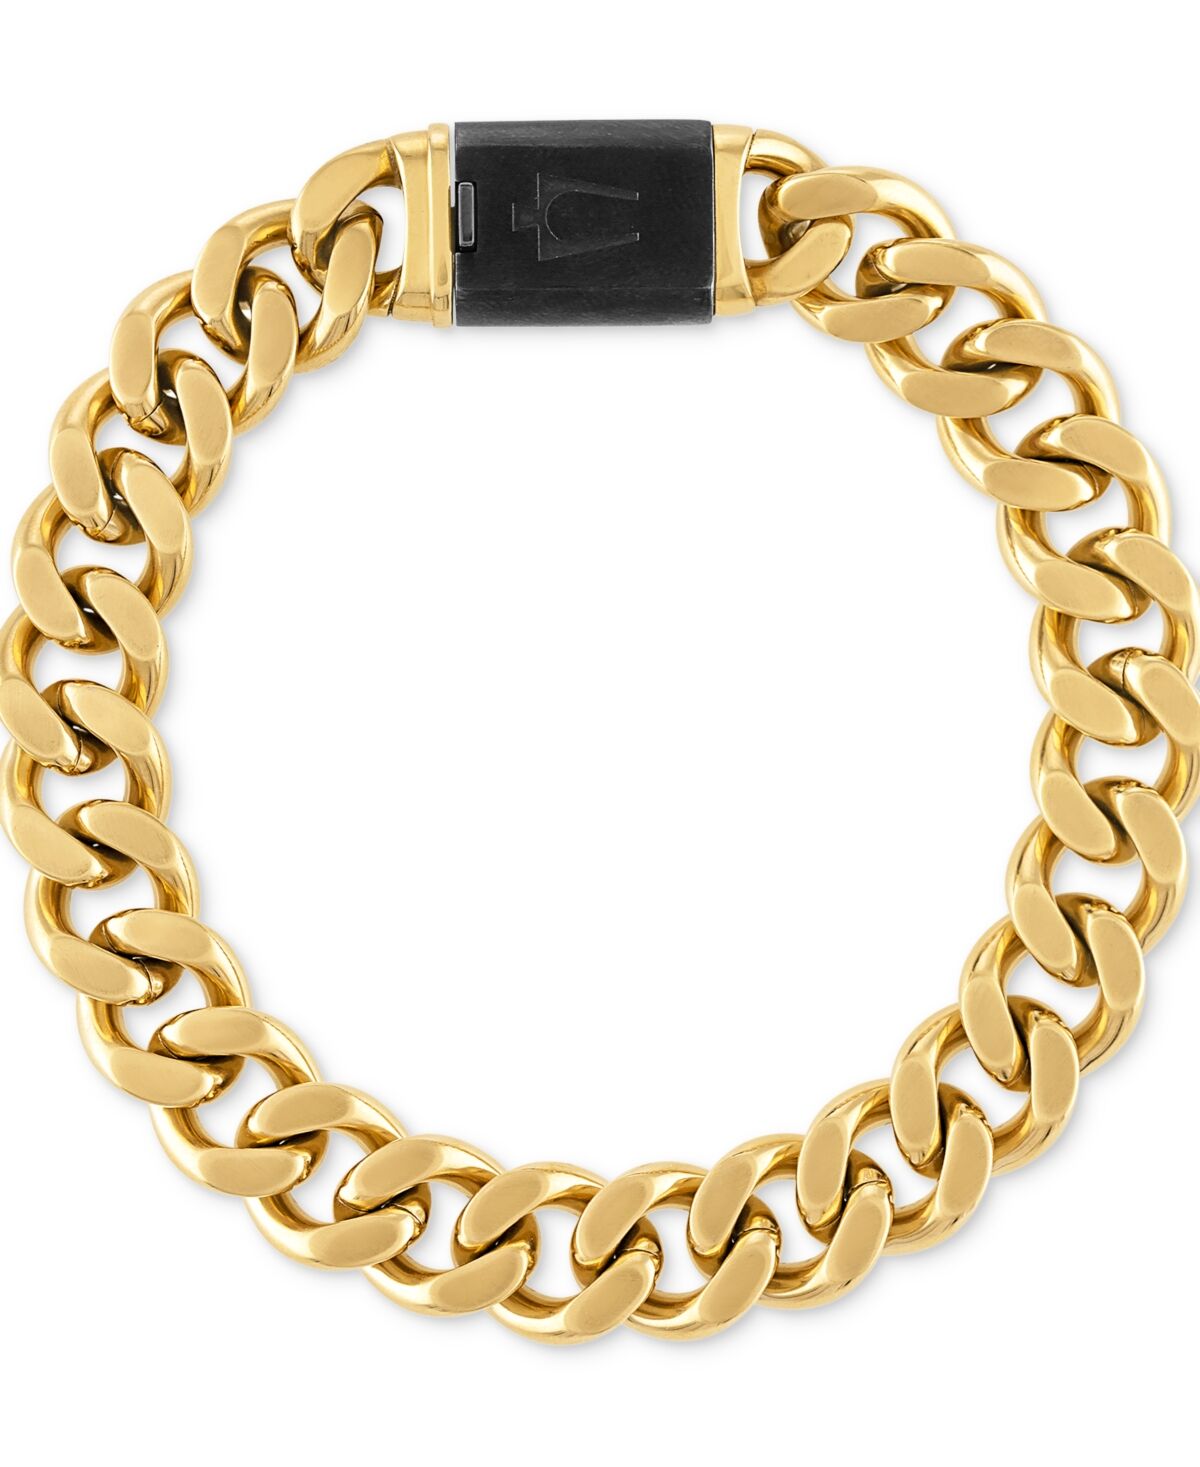 Bulova Men's Classic Curb Chain Bracelet in Gold-Plated Stainless Steel - Gold